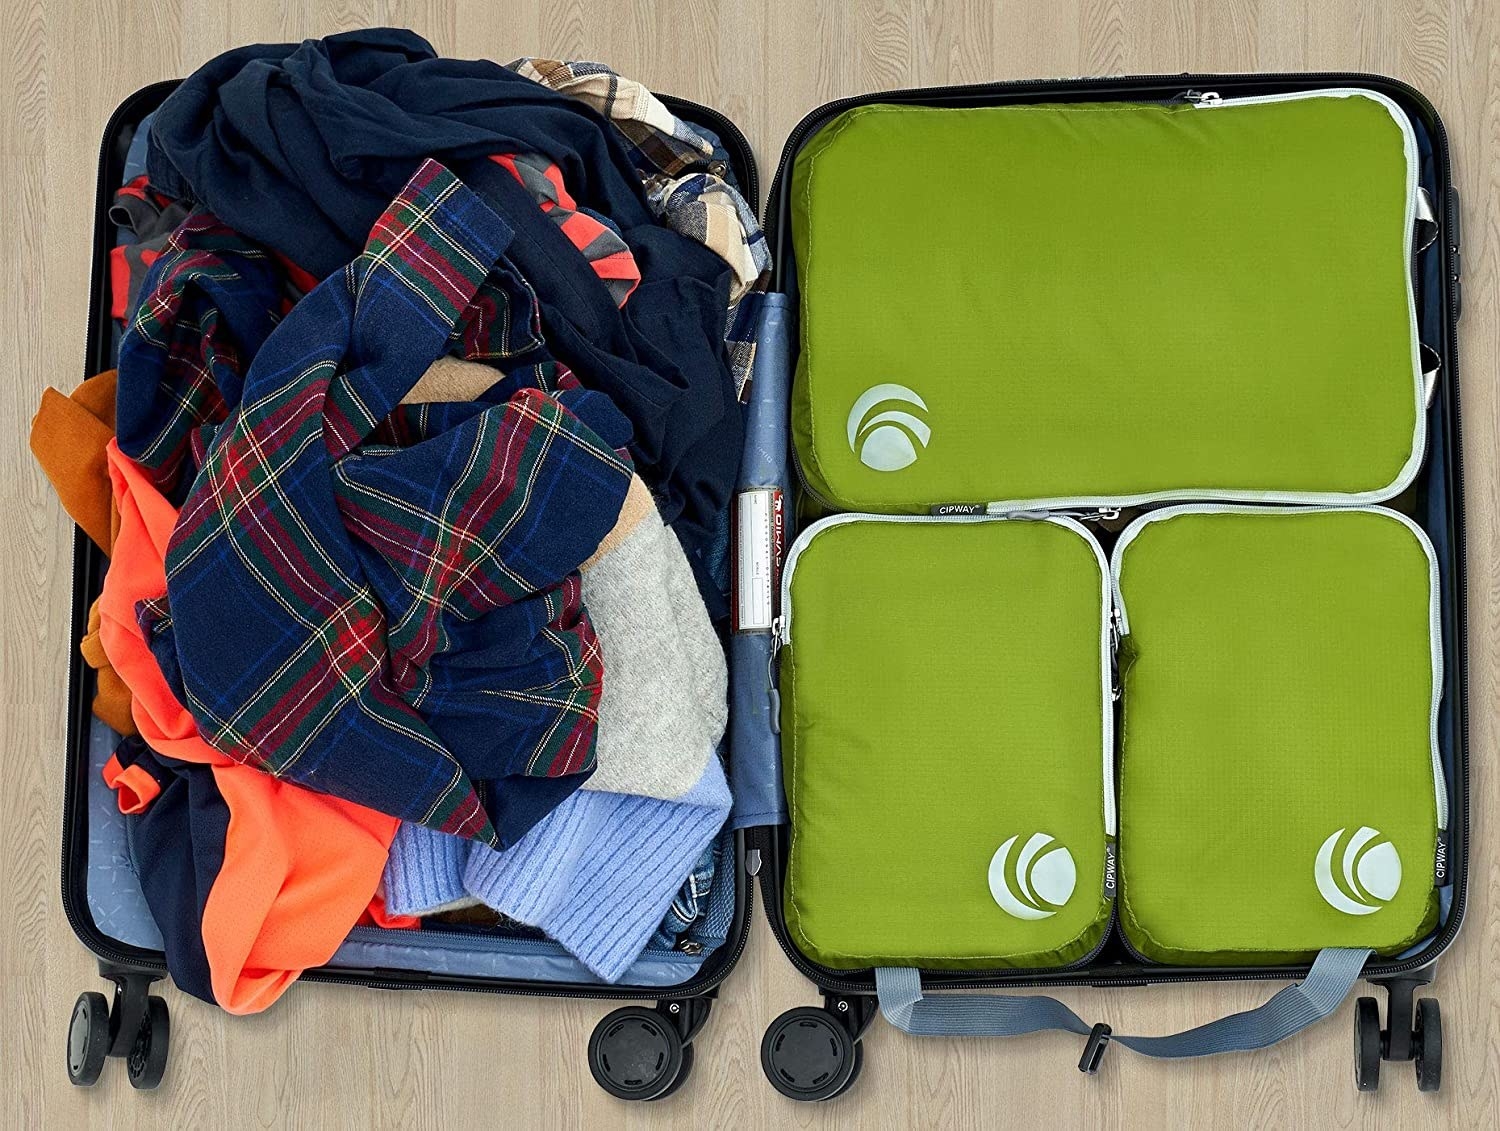 The packing cubes in a suitcase